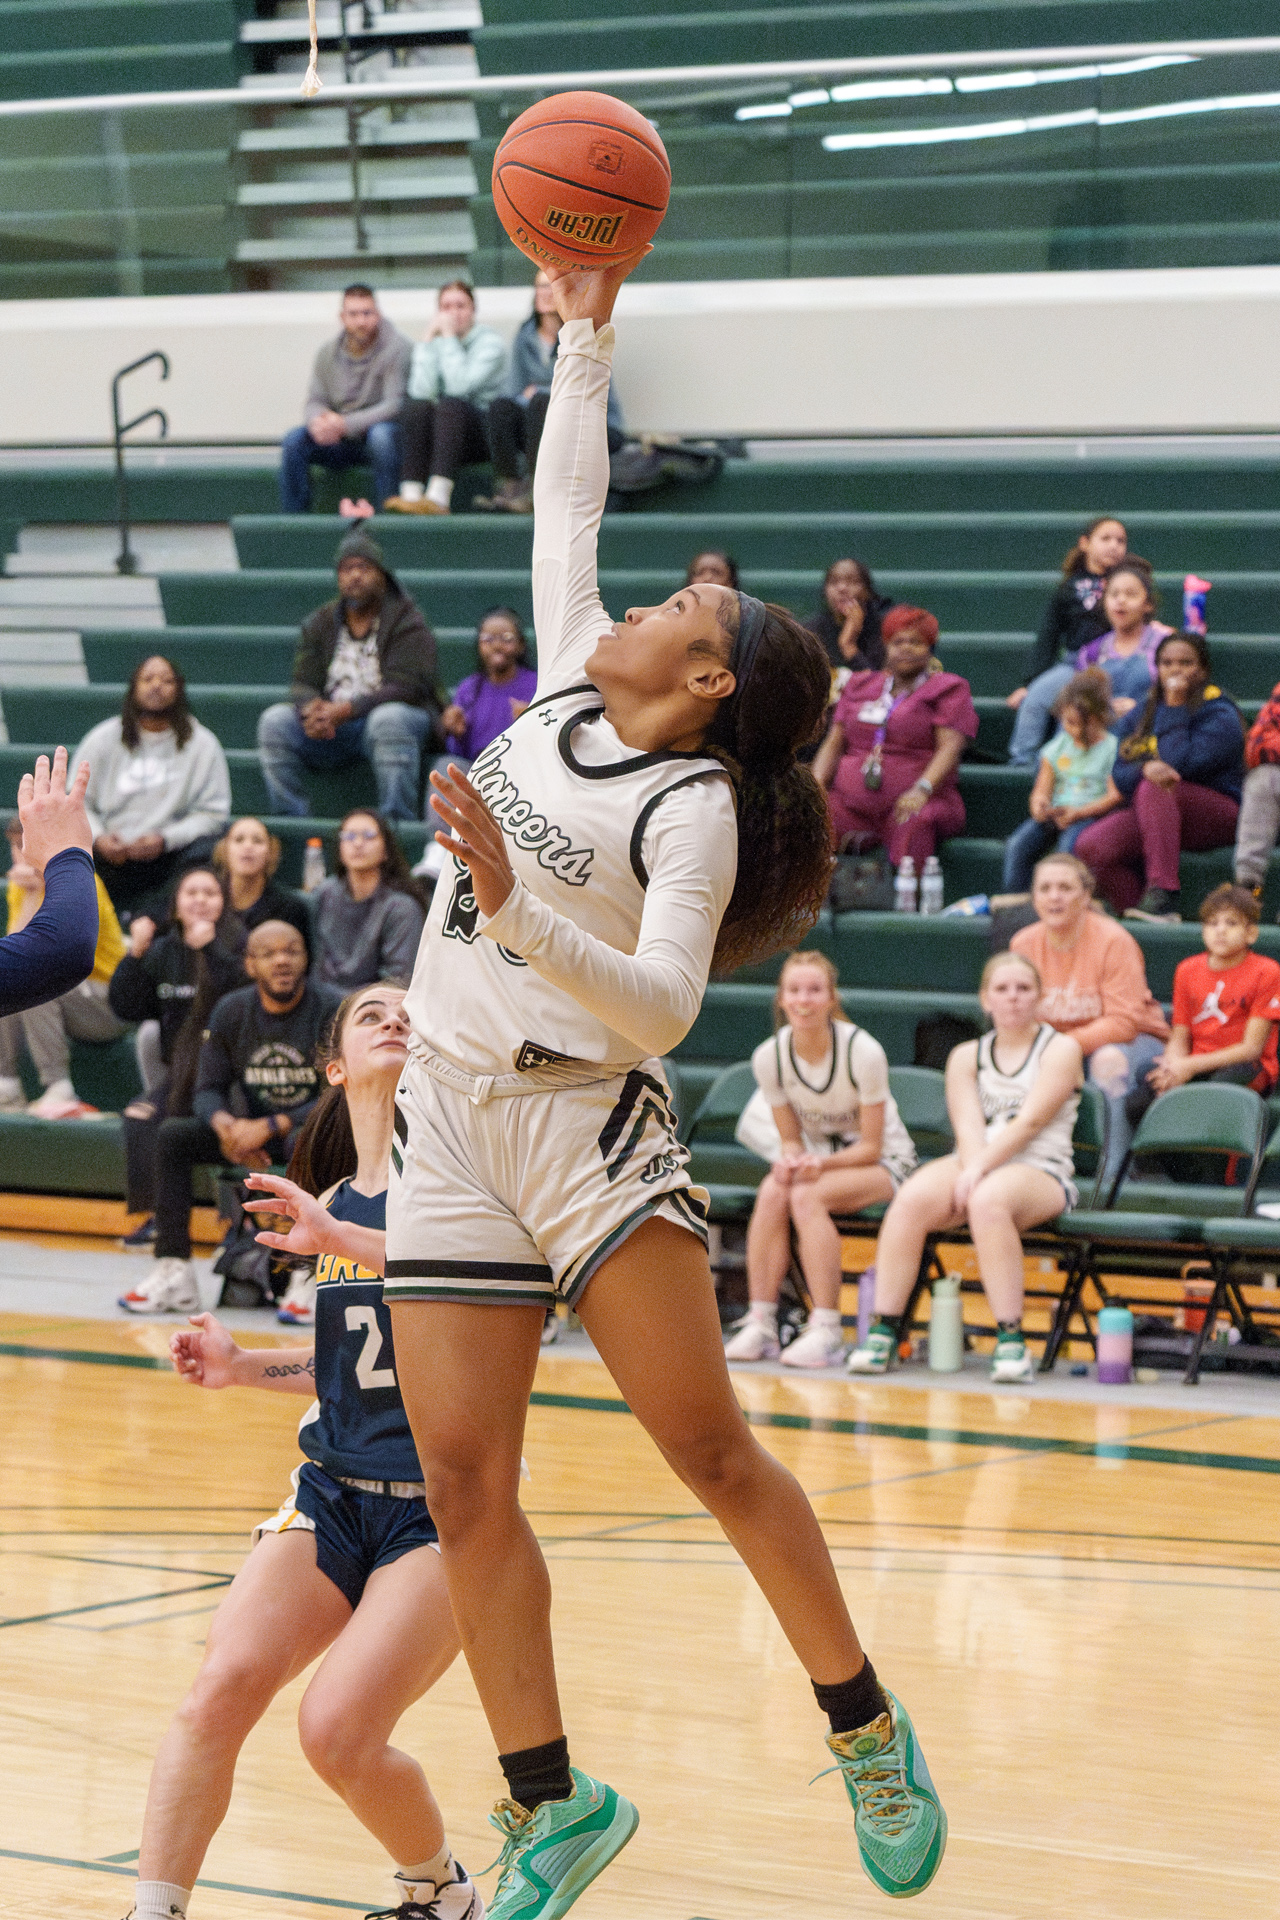 Delta College Women's basketball player jumps for ball on the court